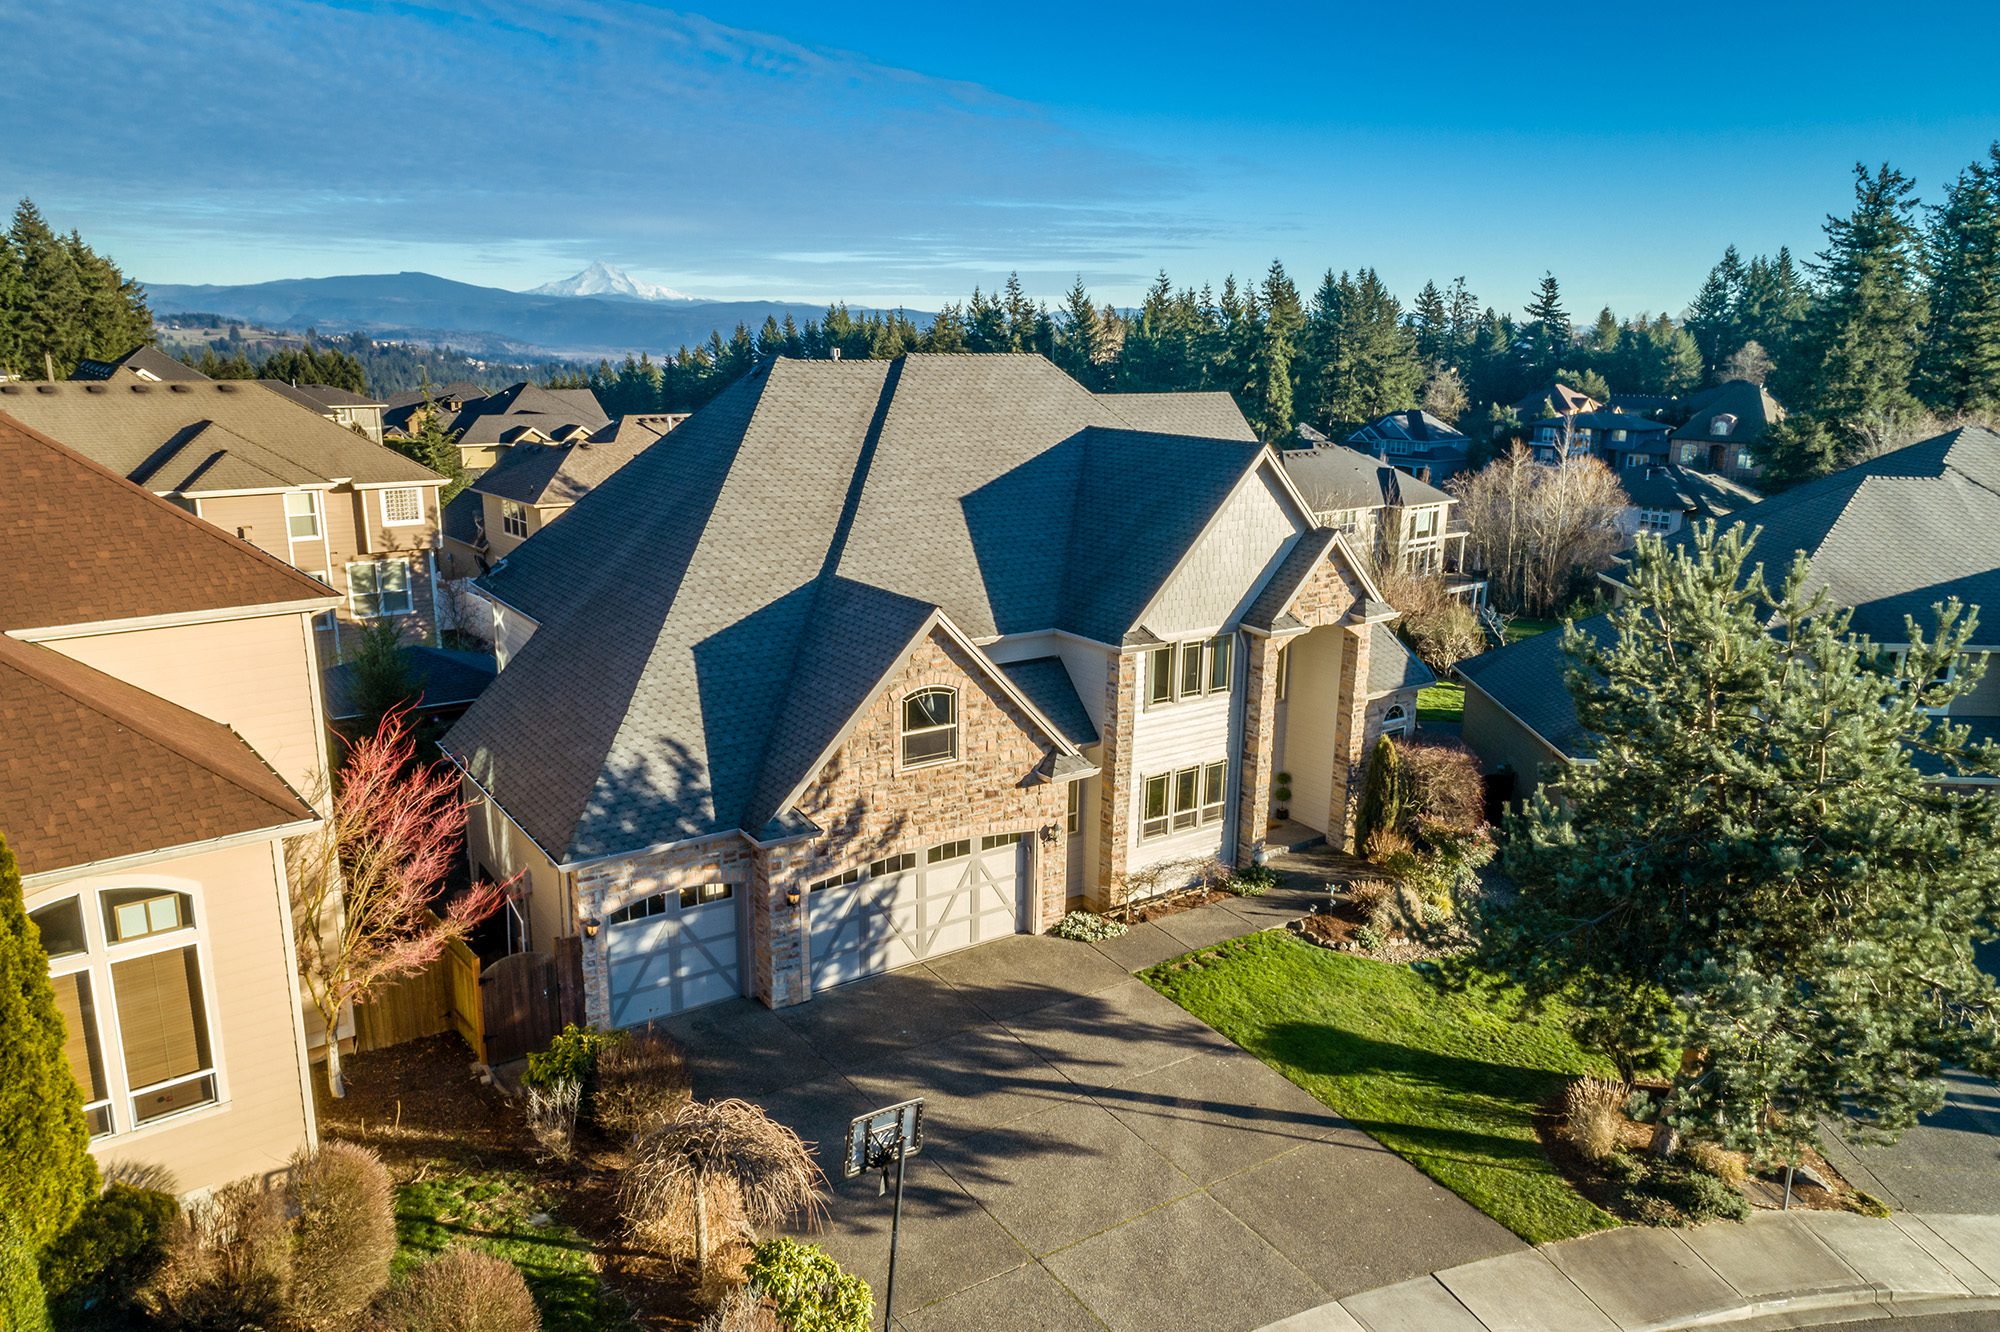 Luxury home in the Pacific Northwest photographed with a drone a